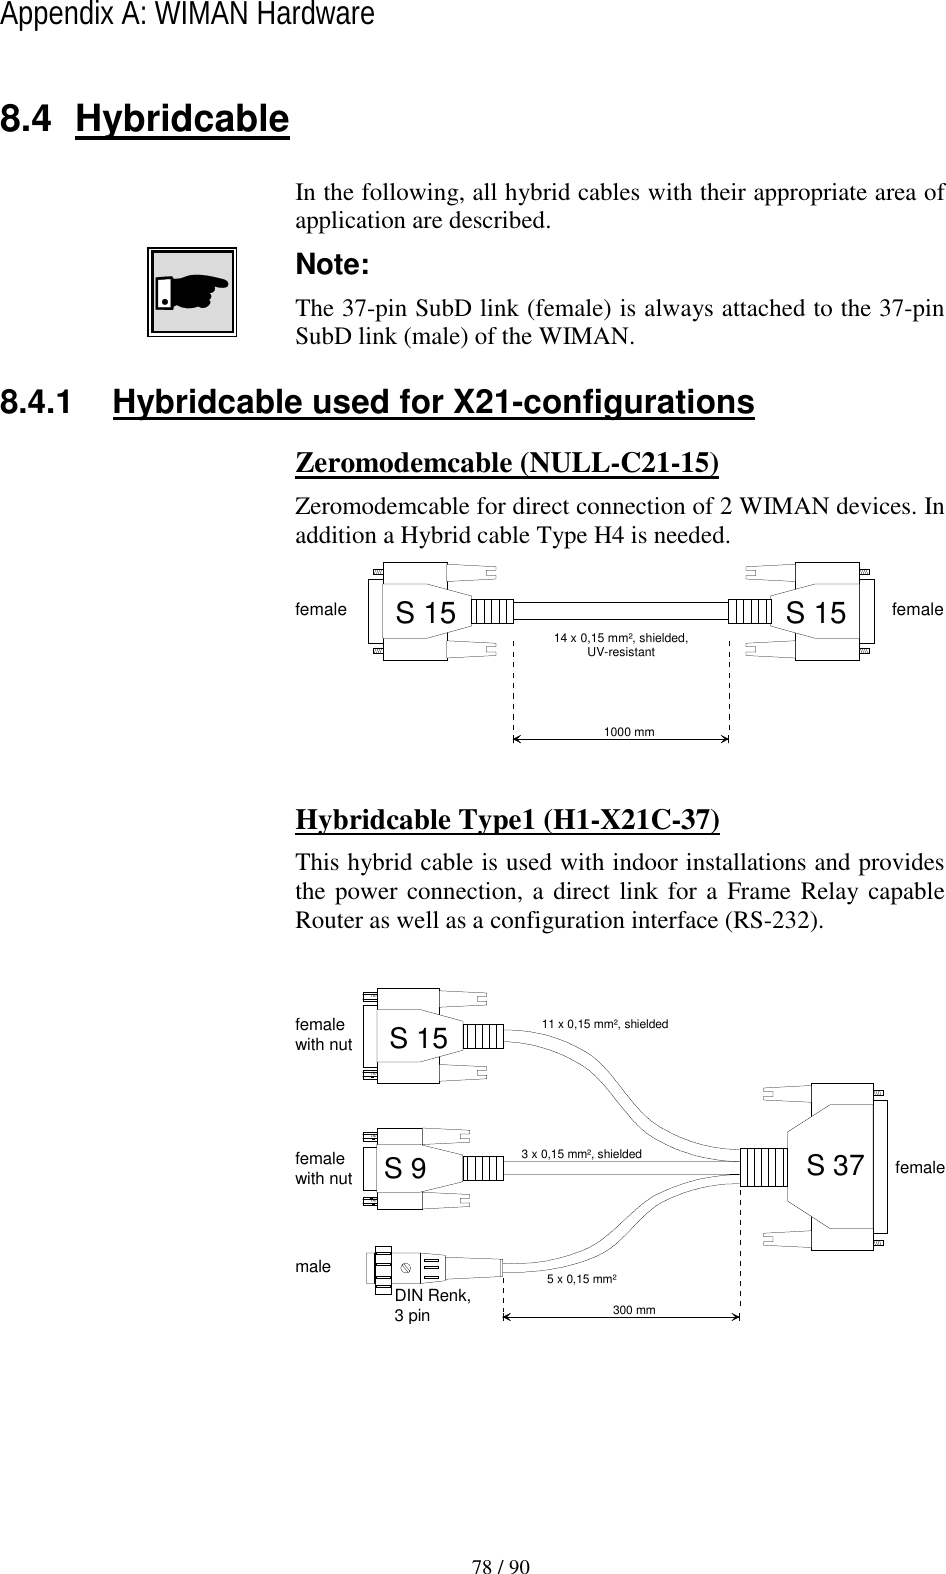   78 / 90 Appendix A: WIMAN Hardware  8.4 Hybridcable In the following, all hybrid cables with their appropriate area of application are described. Note: The 37-pin SubD link (female) is always attached to the 37-pin SubD link (male) of the WIMAN. 8.4.1  Hybridcable used for X21-configurations Zeromodemcable (NULL-C21-15) Zeromodemcable for direct connection of 2 WIMAN devices. In addition a Hybrid cable Type H4 is needed. female14 x 0,15 mm², shielded,UV-resistant1000 mmS 15 S 15 female  Hybridcable Type1 (H1-X21C-37) This hybrid cable is used with indoor installations and provides the power connection, a direct link for a Frame Relay capable Router as well as a configuration interface (RS-232).  S 37malefemale11 x 0,15 mm², shielded3 x 0,15 mm², shielded5 x 0,15 mm²femalewith nut300 mmS 15DIN Renk,3 pinS 9femalewith nut 